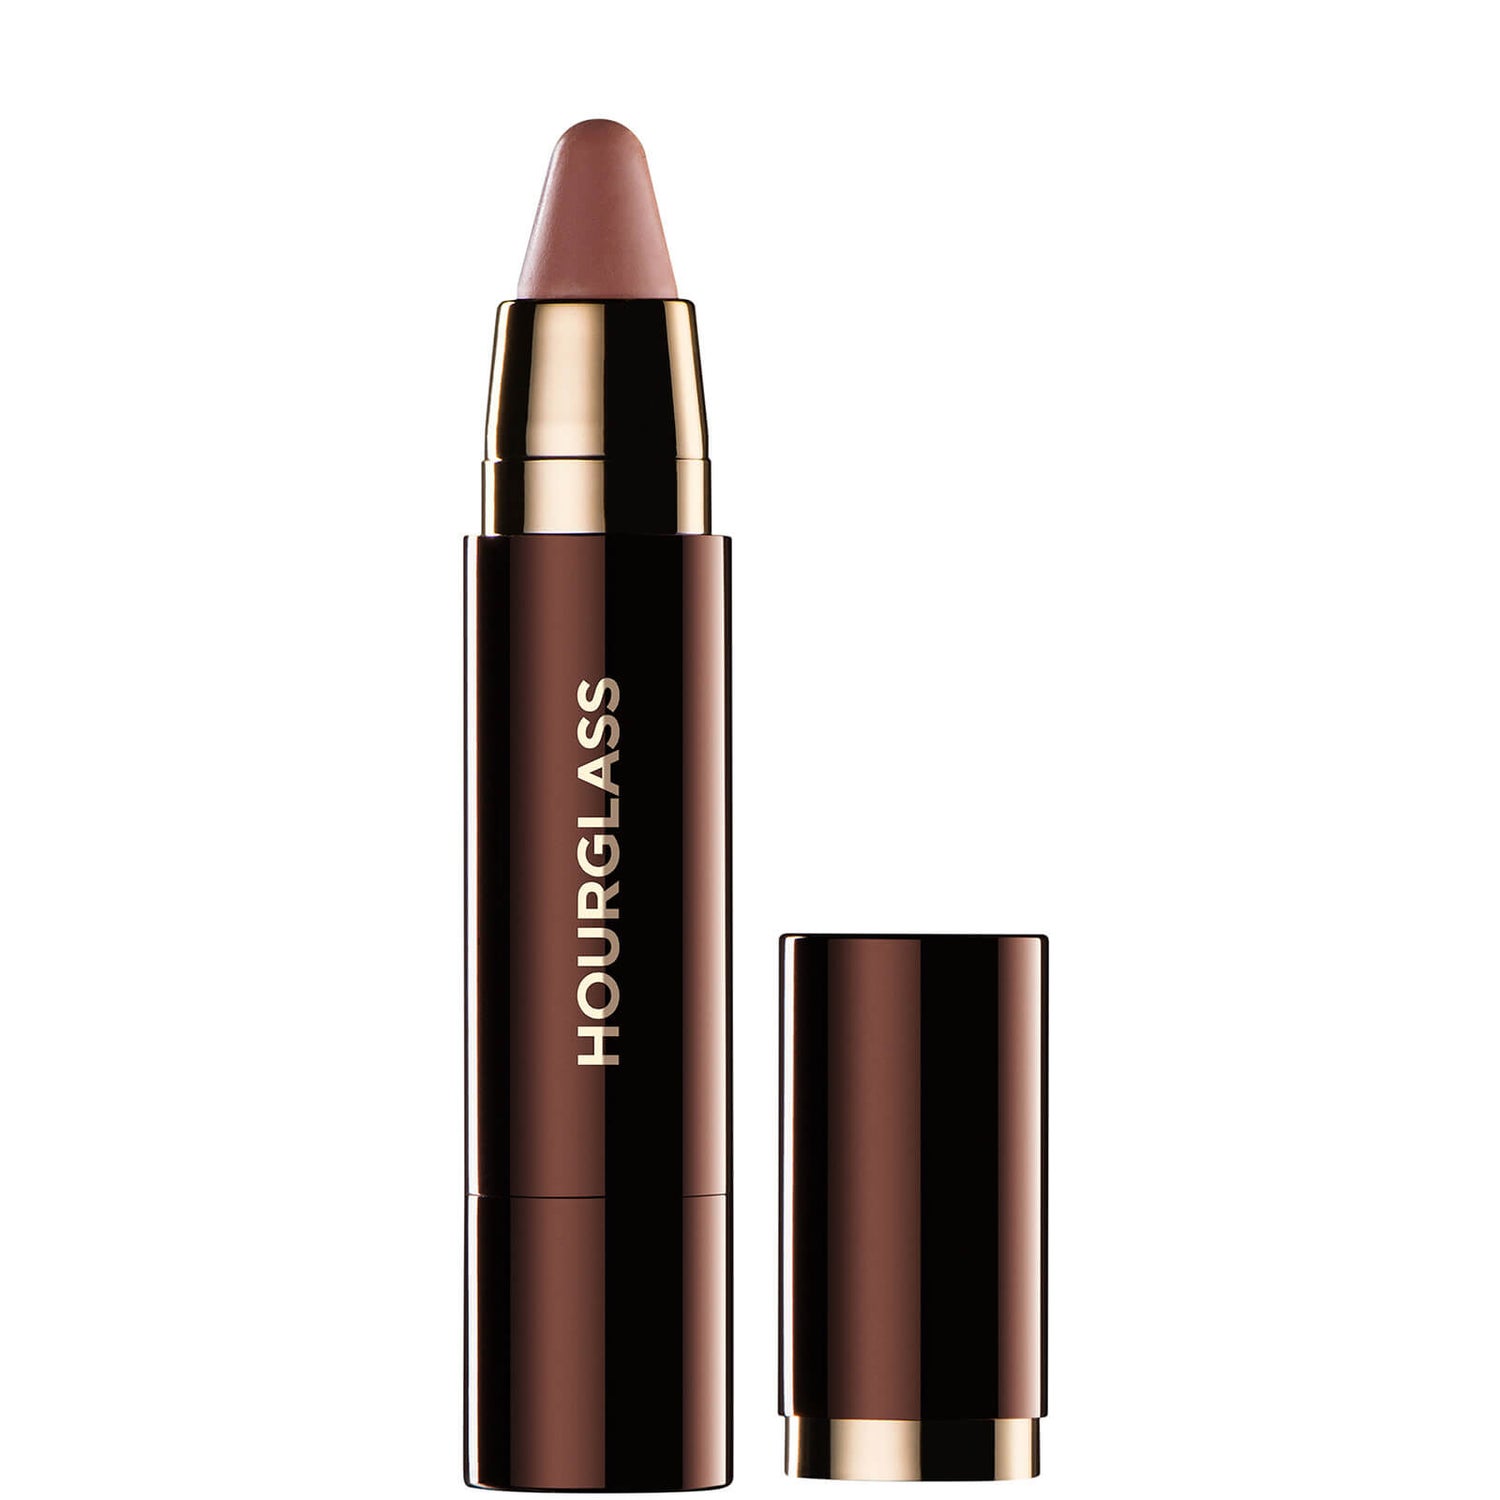 Hourglass Femme Nude Lipstick Stylo (Various Shades)